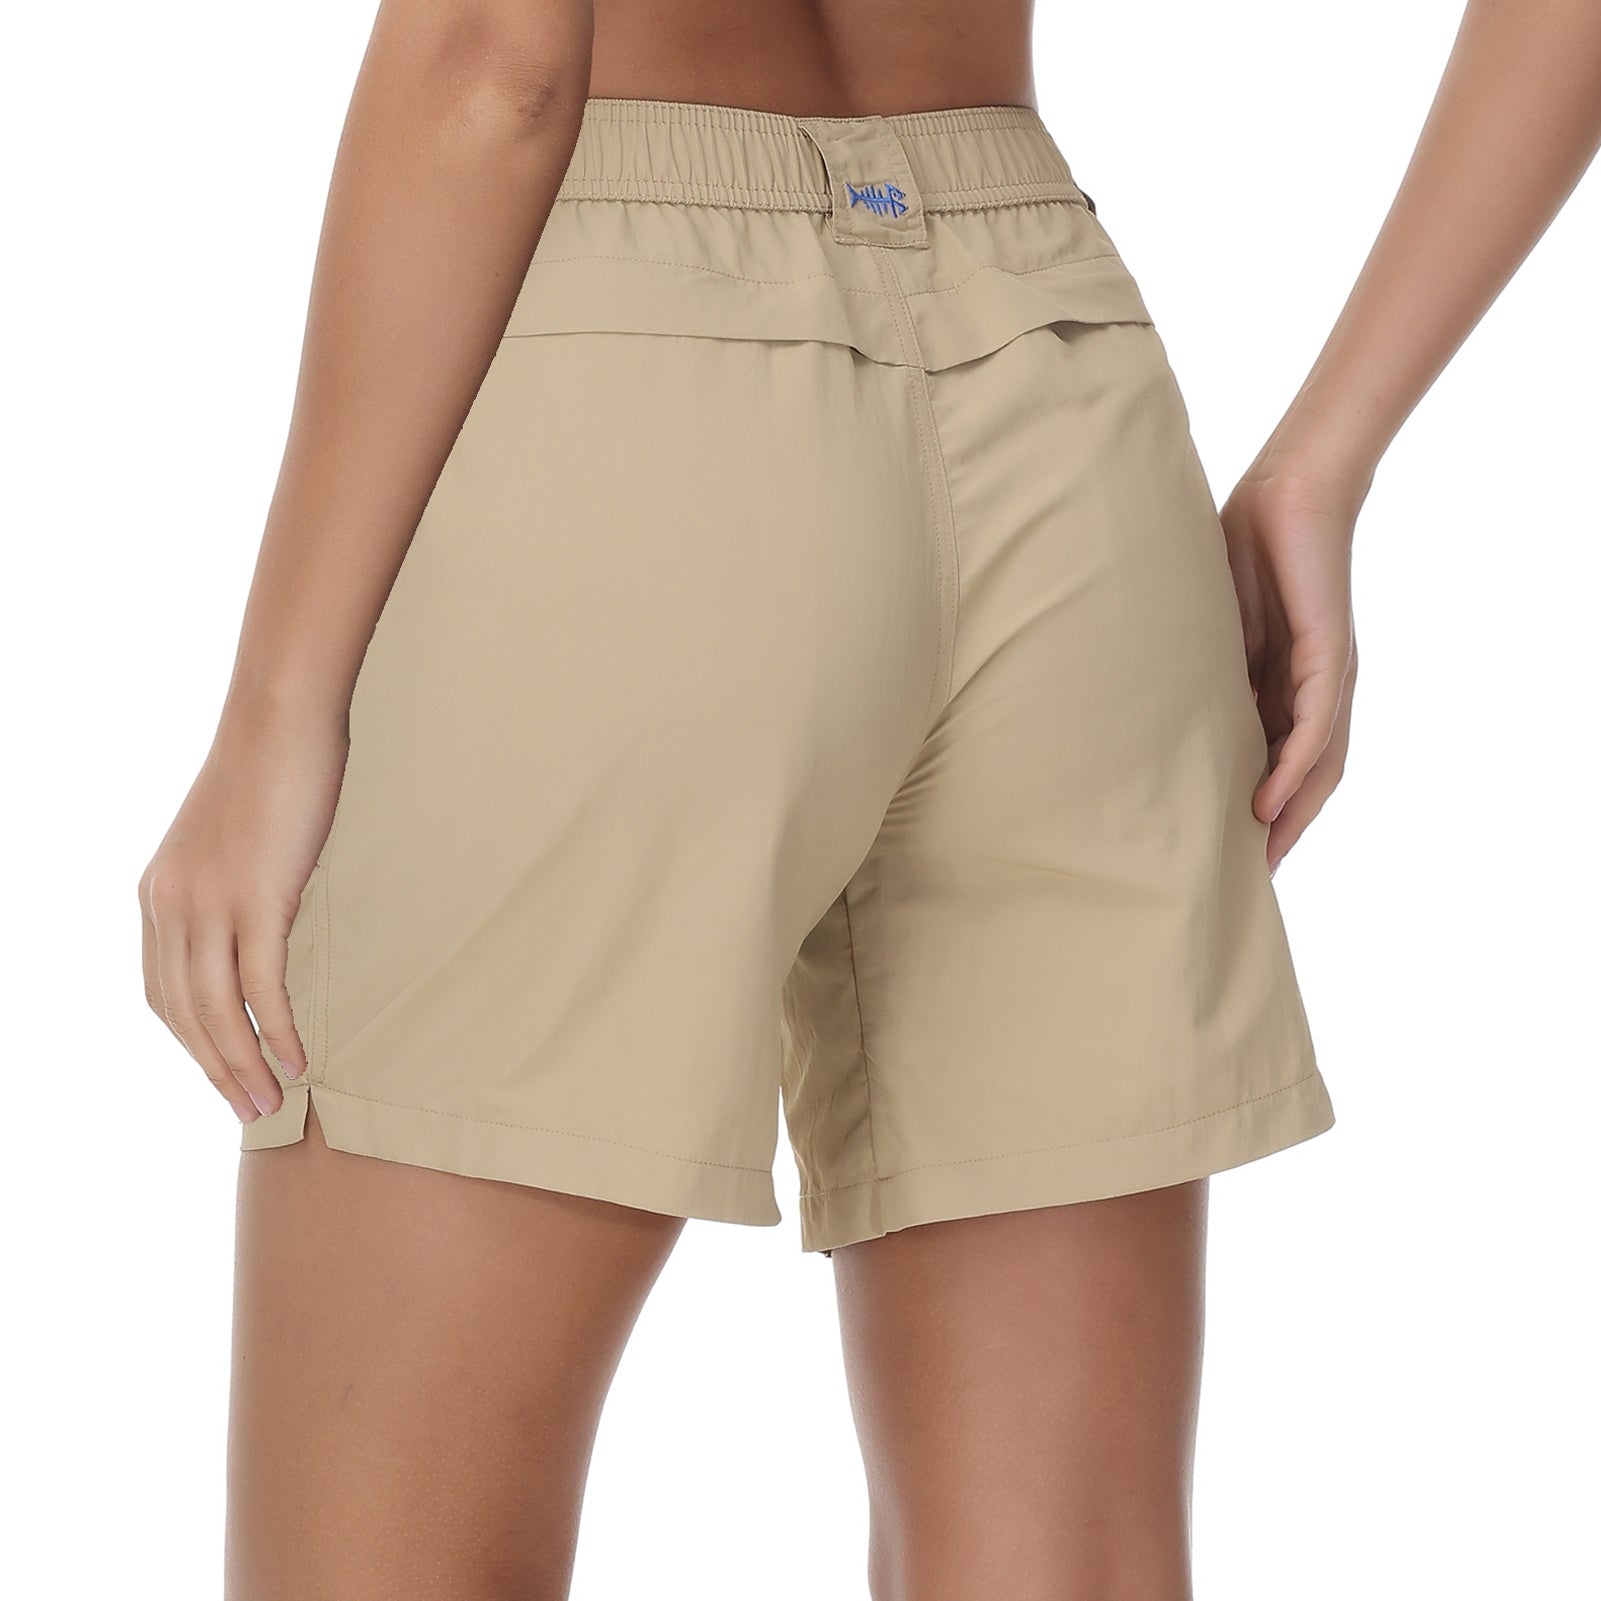  Mossy Oak Womens All Outdoor Flex Fishing Shorts, Stretch,  Quick Dry Shorts for Women, Light Khaki, Small : Sports & Outdoors